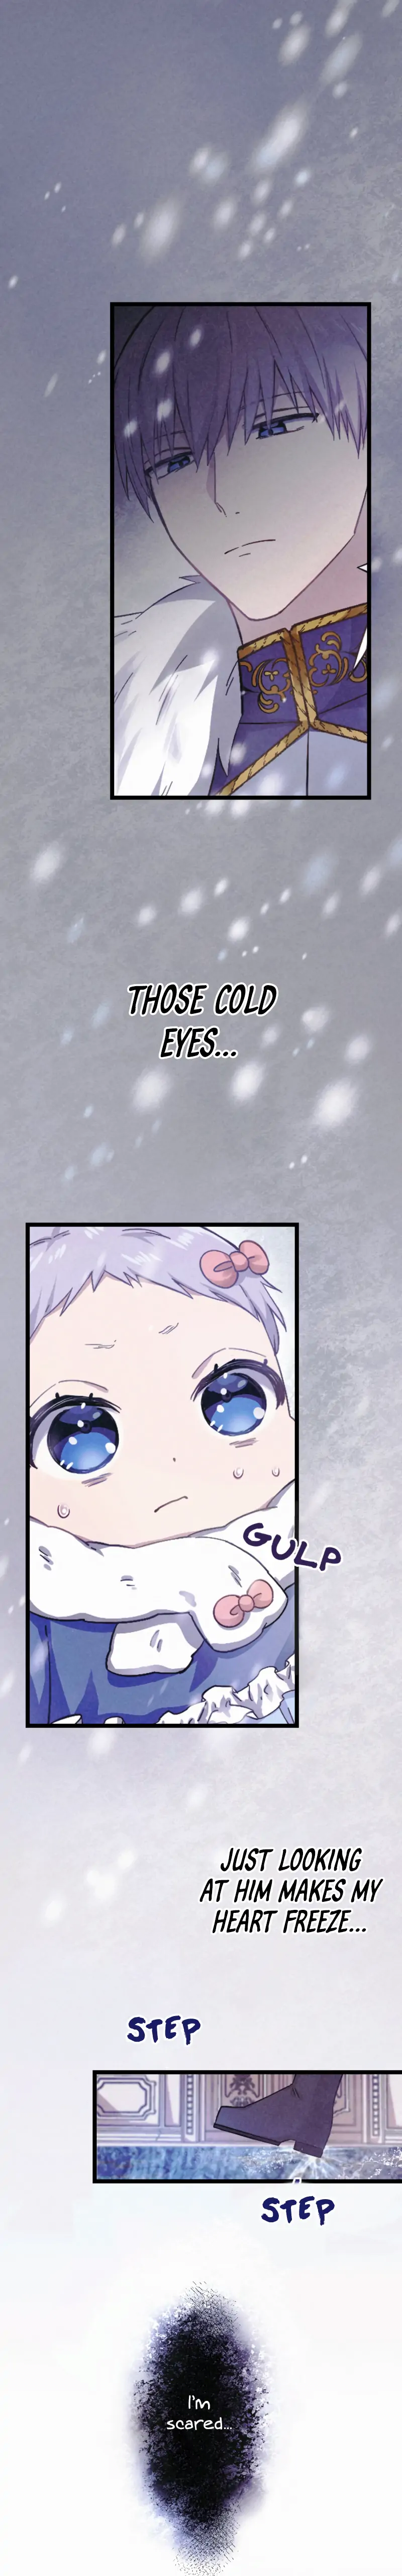 It’s Not Easy Being the Ice Emperor’s Daughter chapter 2